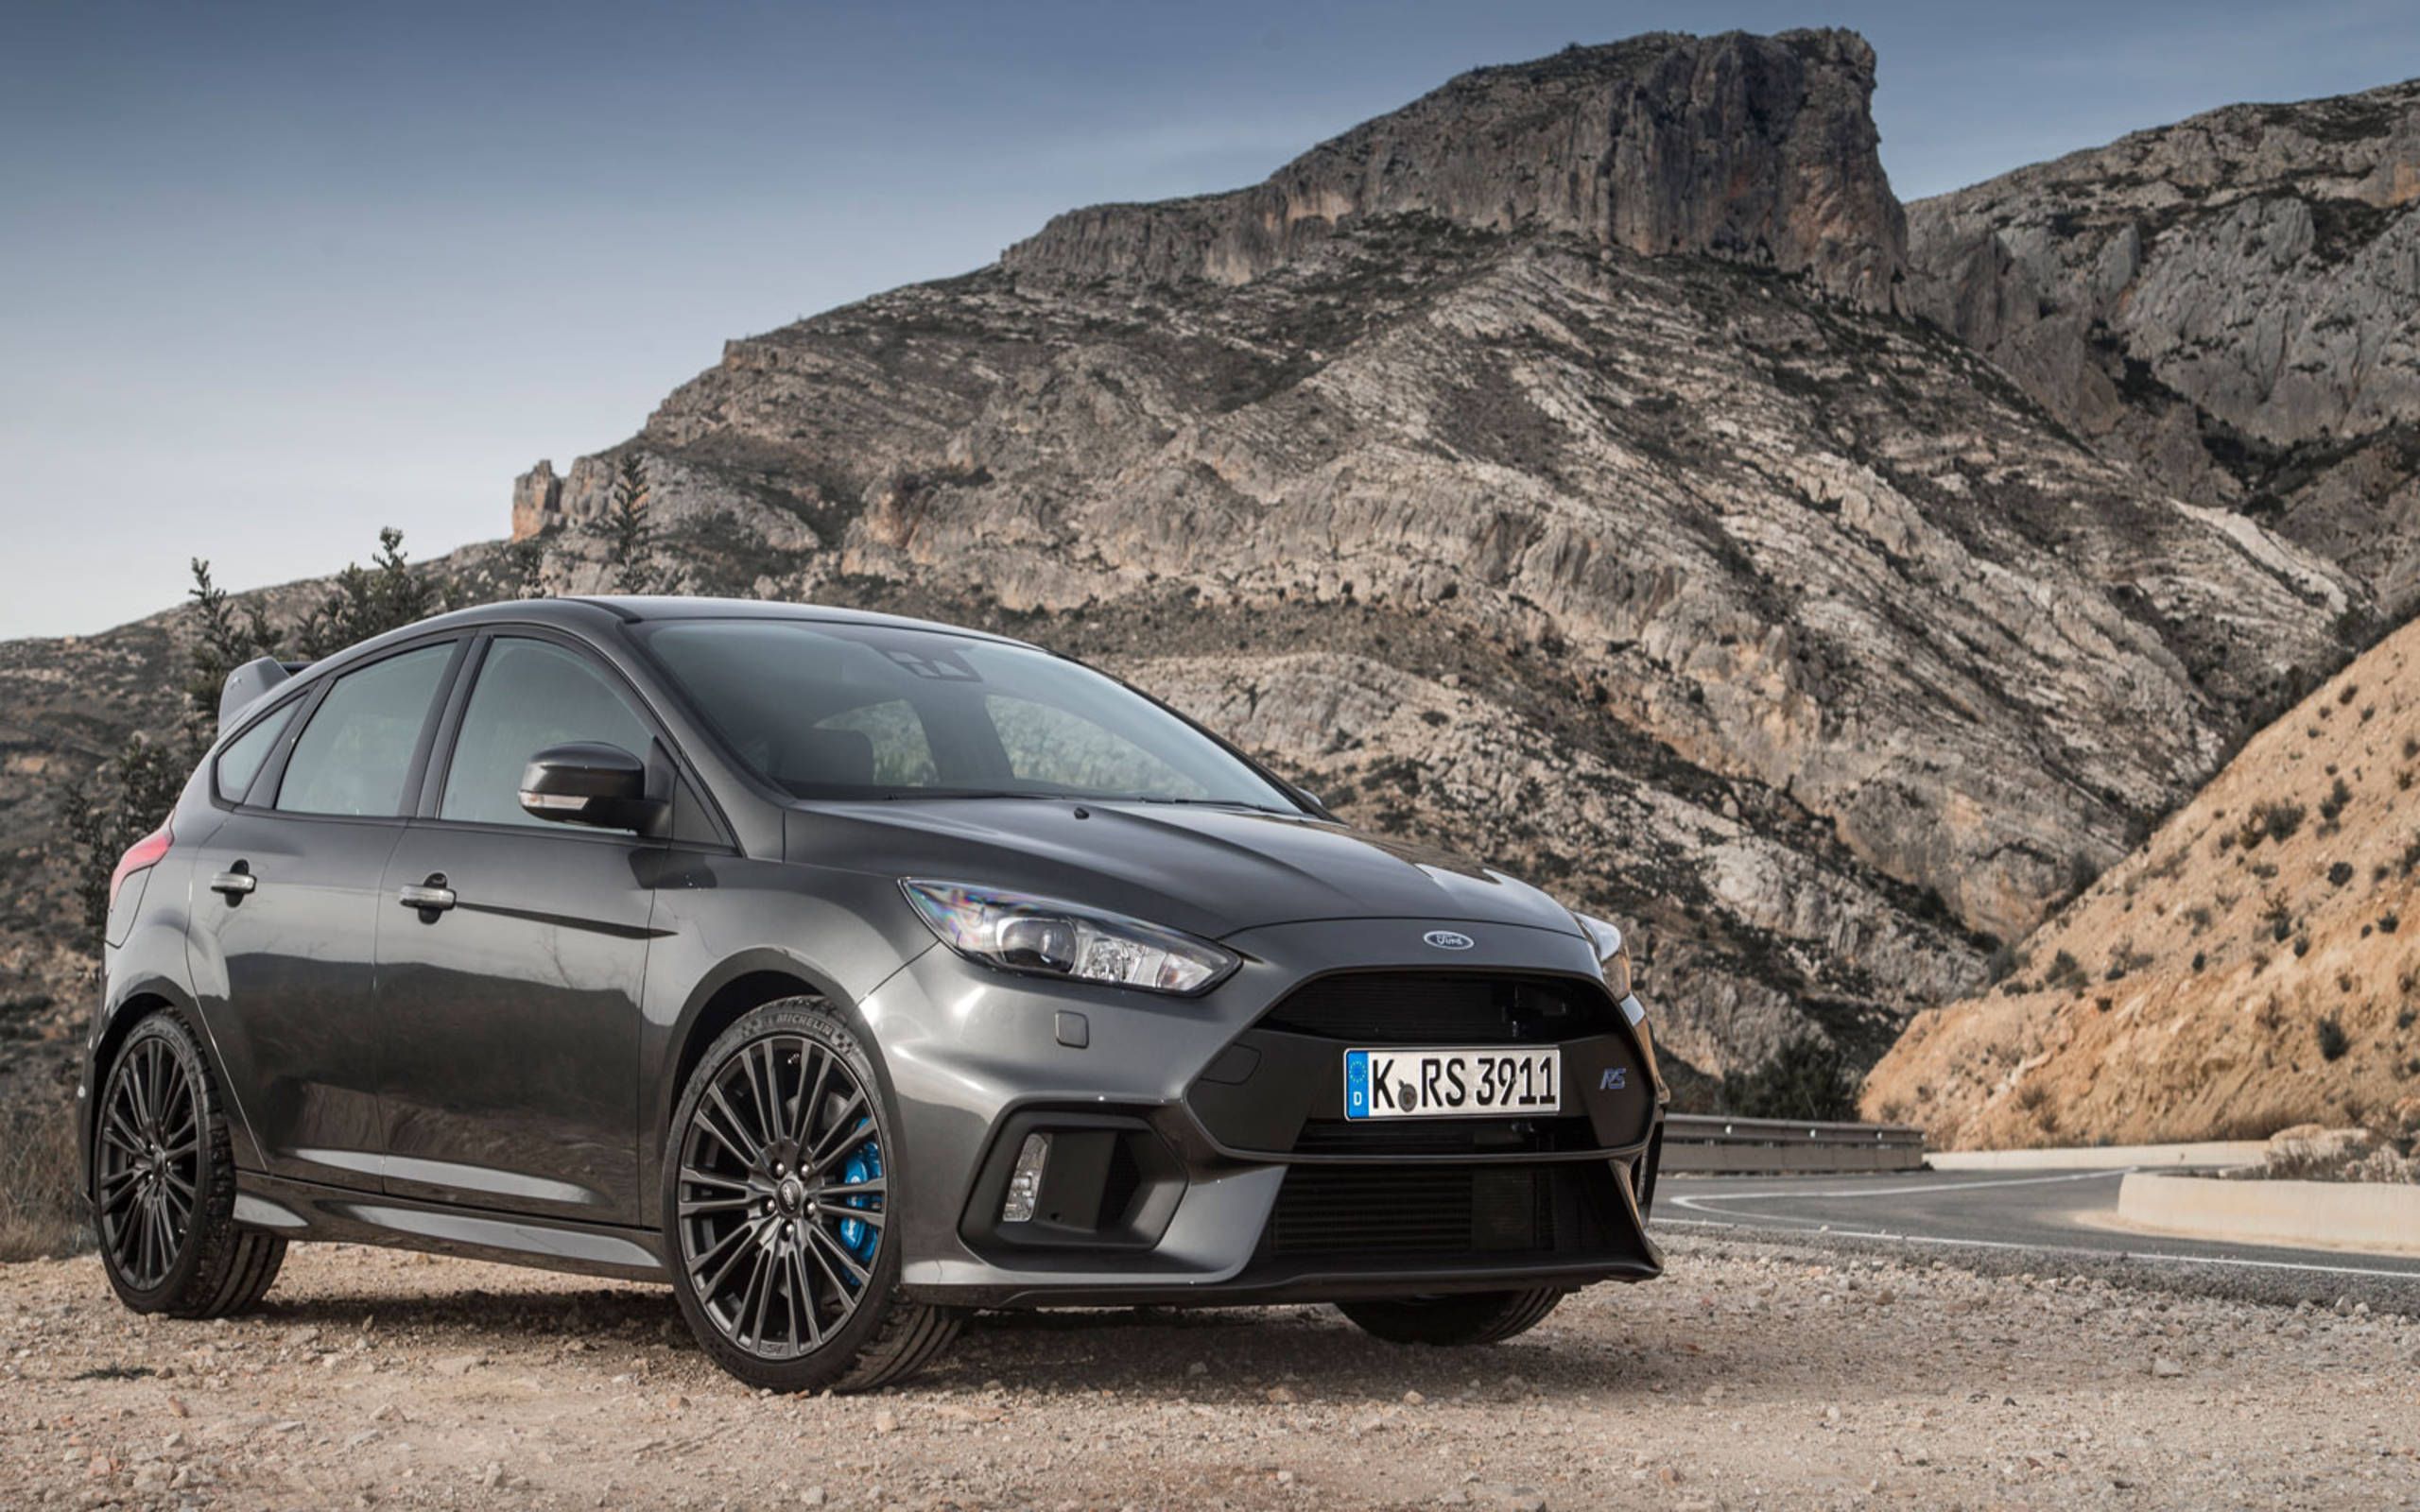 This Ford Focus RS cost more than half a million dollars